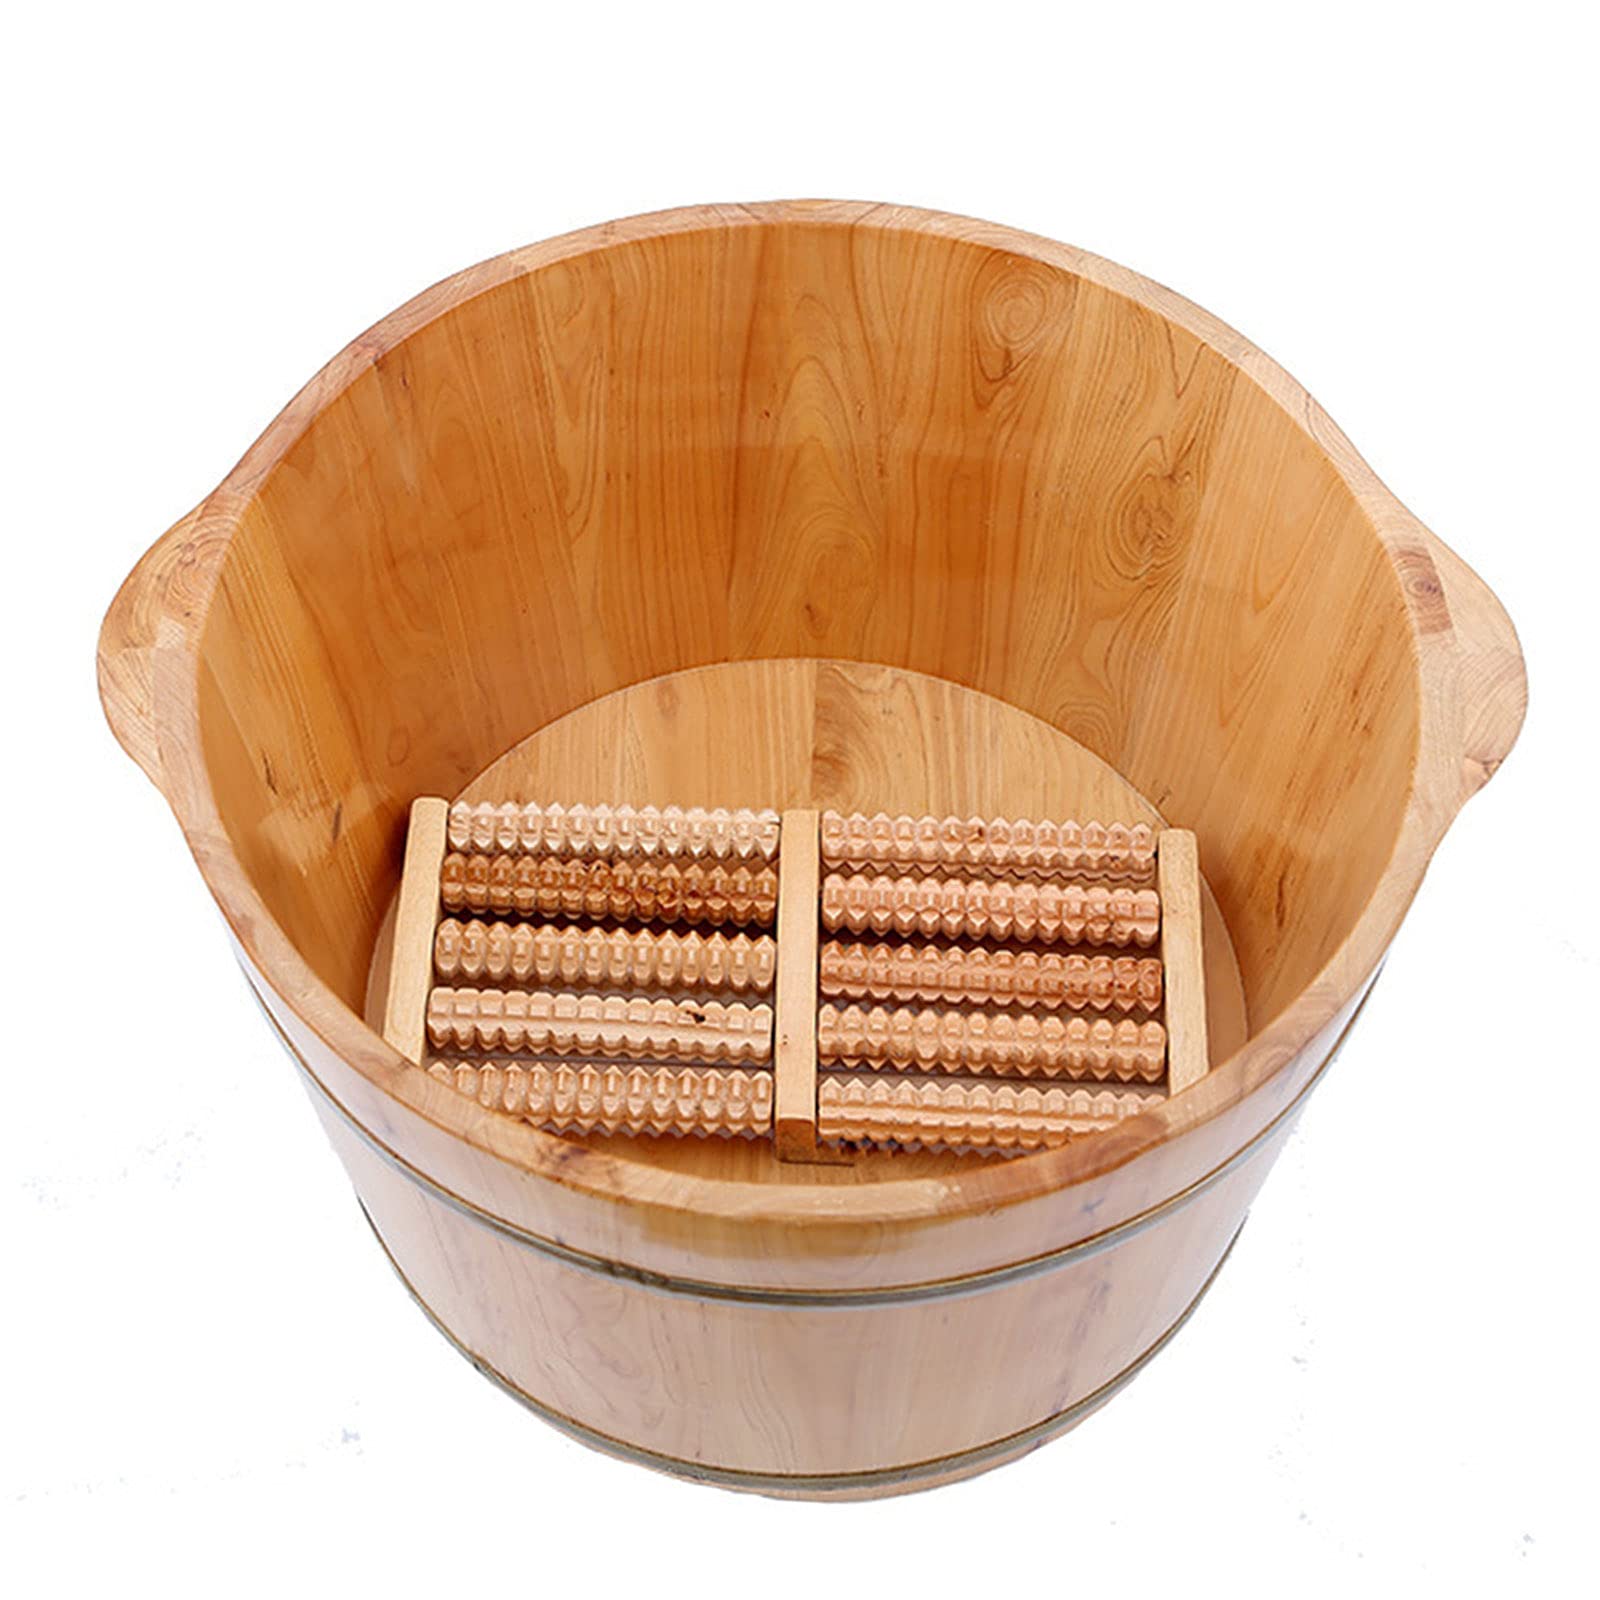 AngelcityCC Wood Foot Tub with Massager and lid, Solid Wood Handmade Wooden Foot Basin Set for Soaking Feet Spa Foot Care